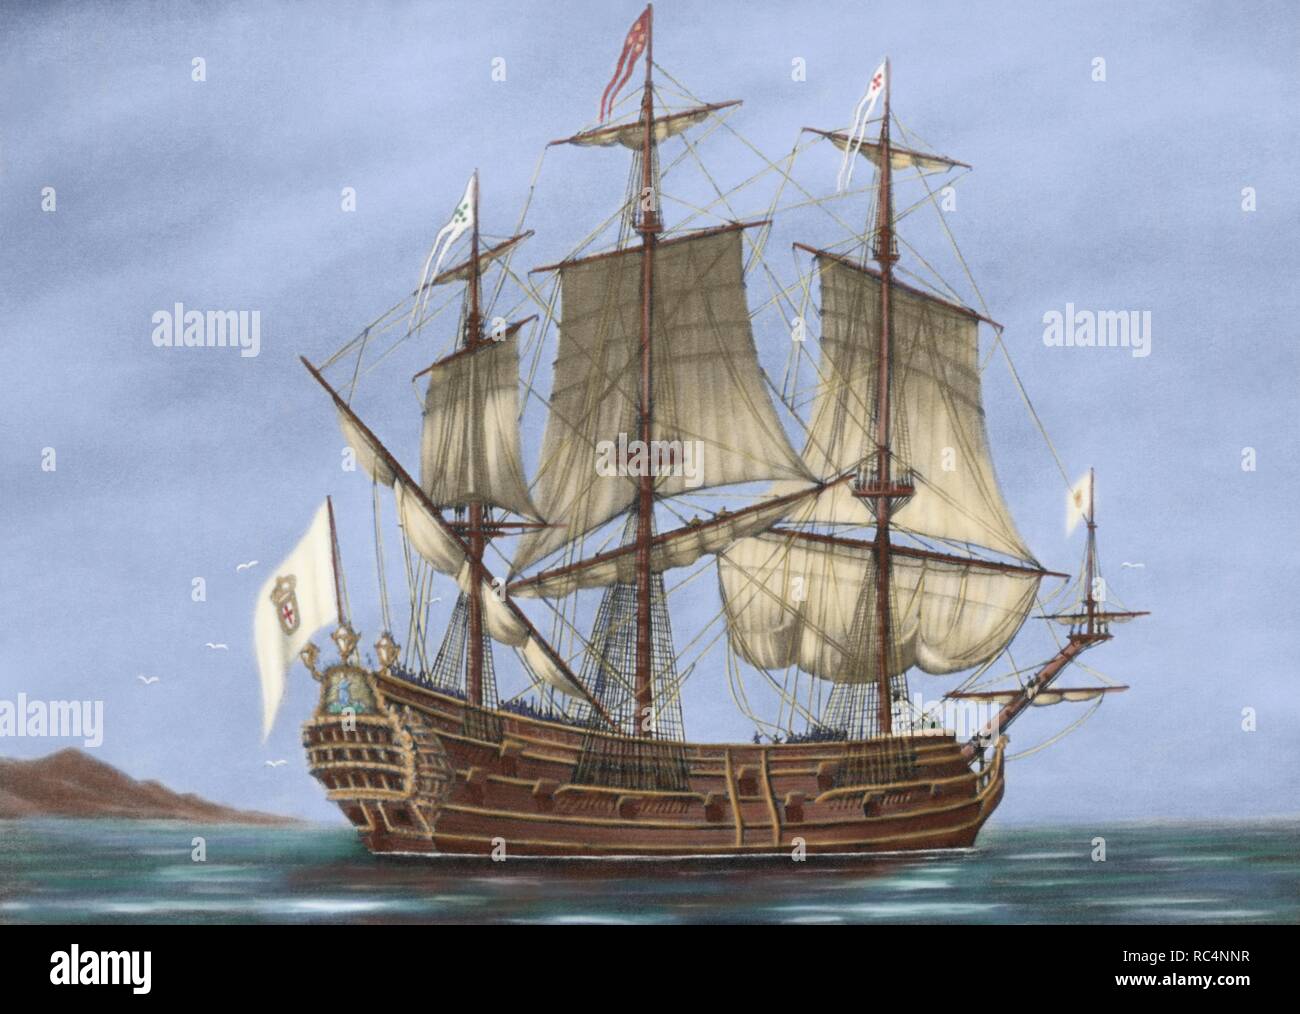 Galleon Saint Lucia. 17th century. The Grand Duke Ferdinand I of Tuscany in 1608 organized an expedition to northern Brazil, commanded by English captain Robert Thornton, to establish colony  in America. Engraving. Colored. Stock Photo